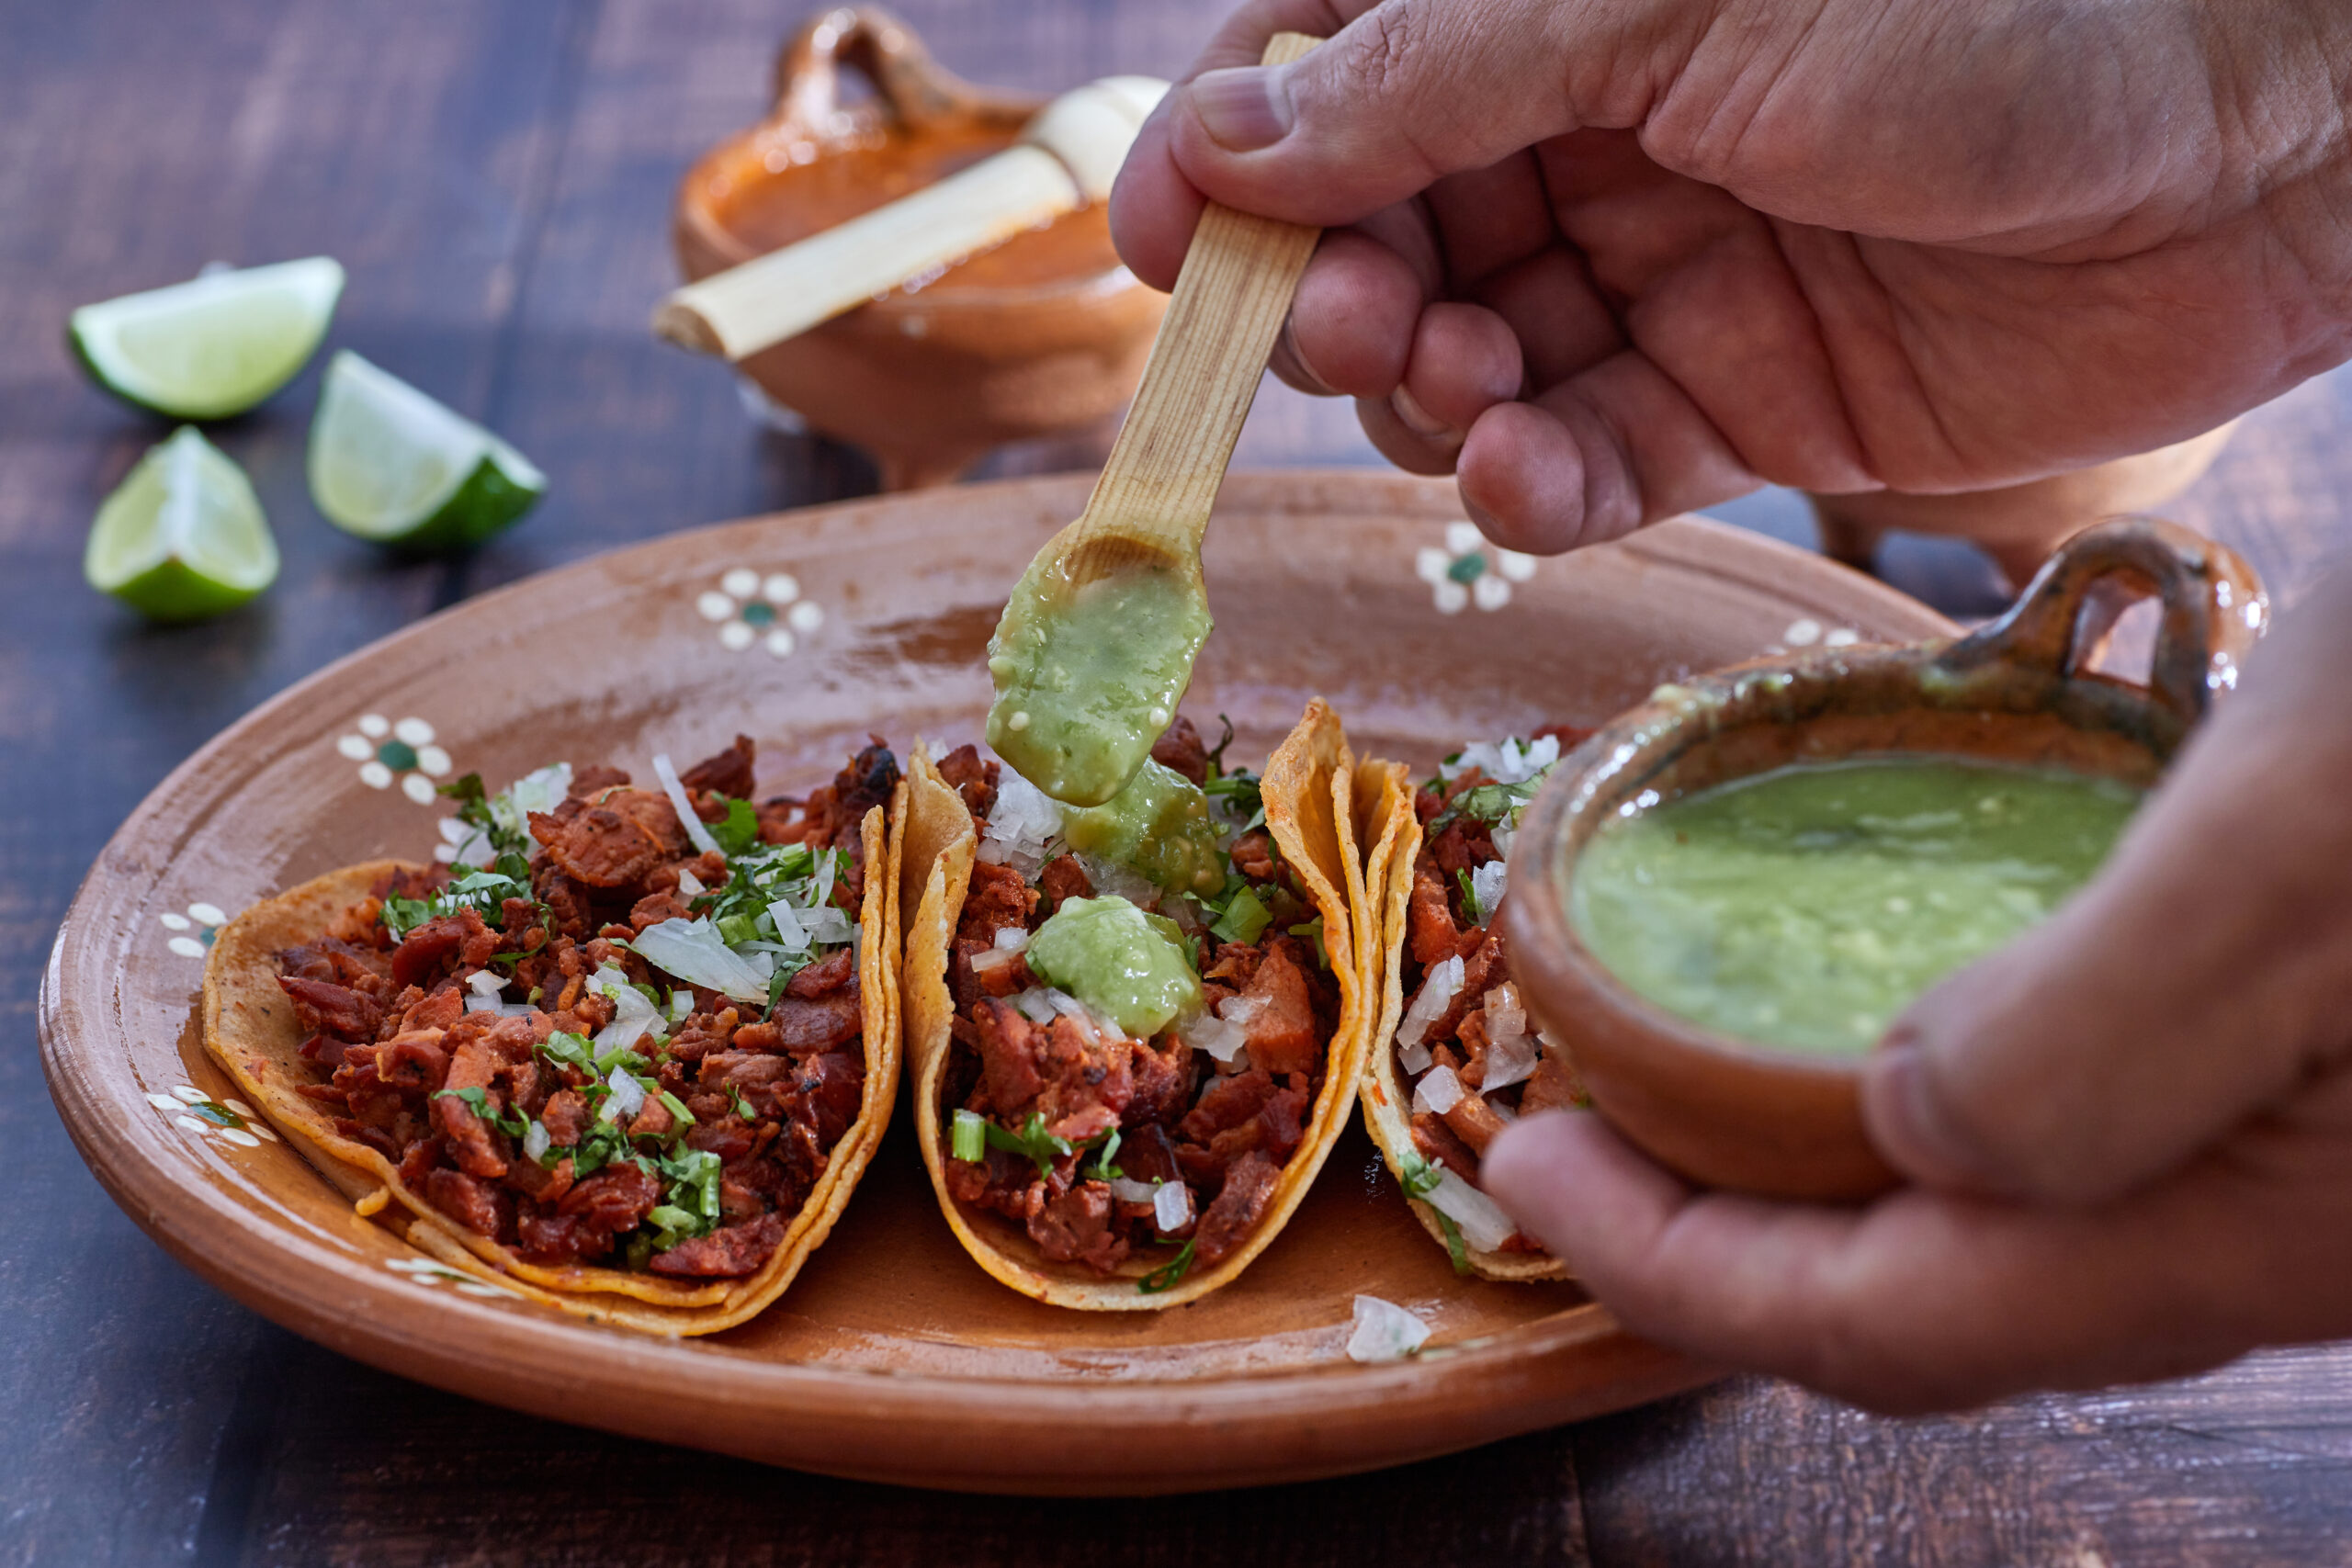 Tacos al pastor, traditional Mexican food, with onion, cilantro, pineapple, red sauce or guacamole.